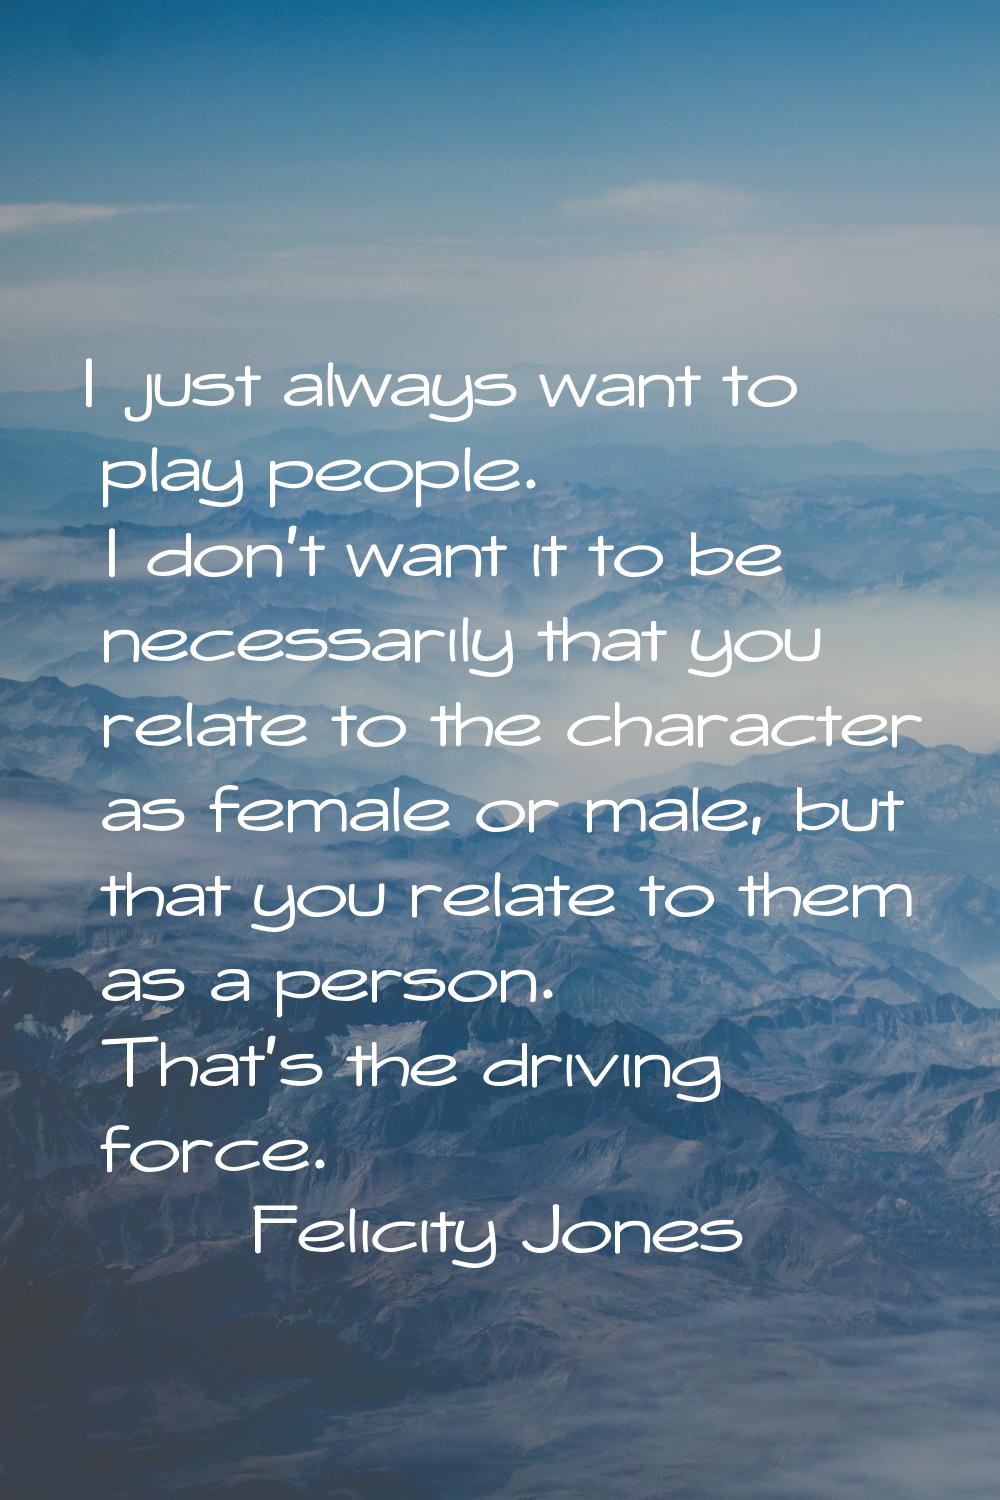 I just always want to play people. I don't want it to be necessarily that you relate to the charact